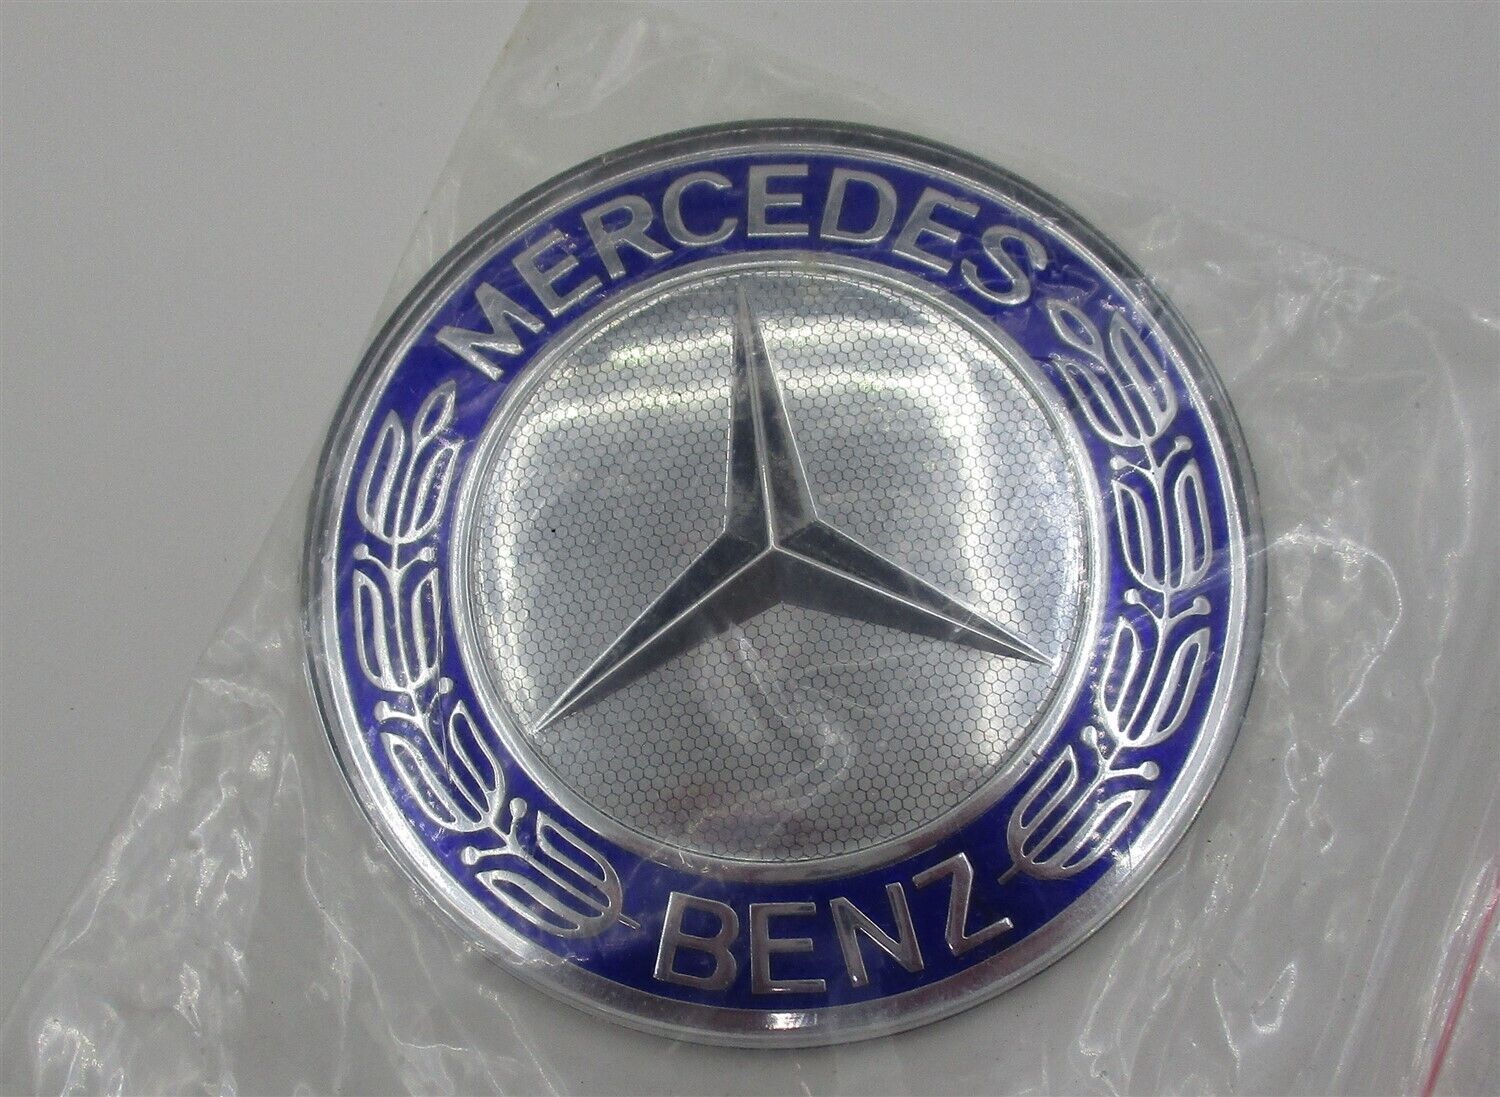 Mercedes Benz Wheel Caps, Stick On, Red Backs, Classic Logo (Lot of 4)